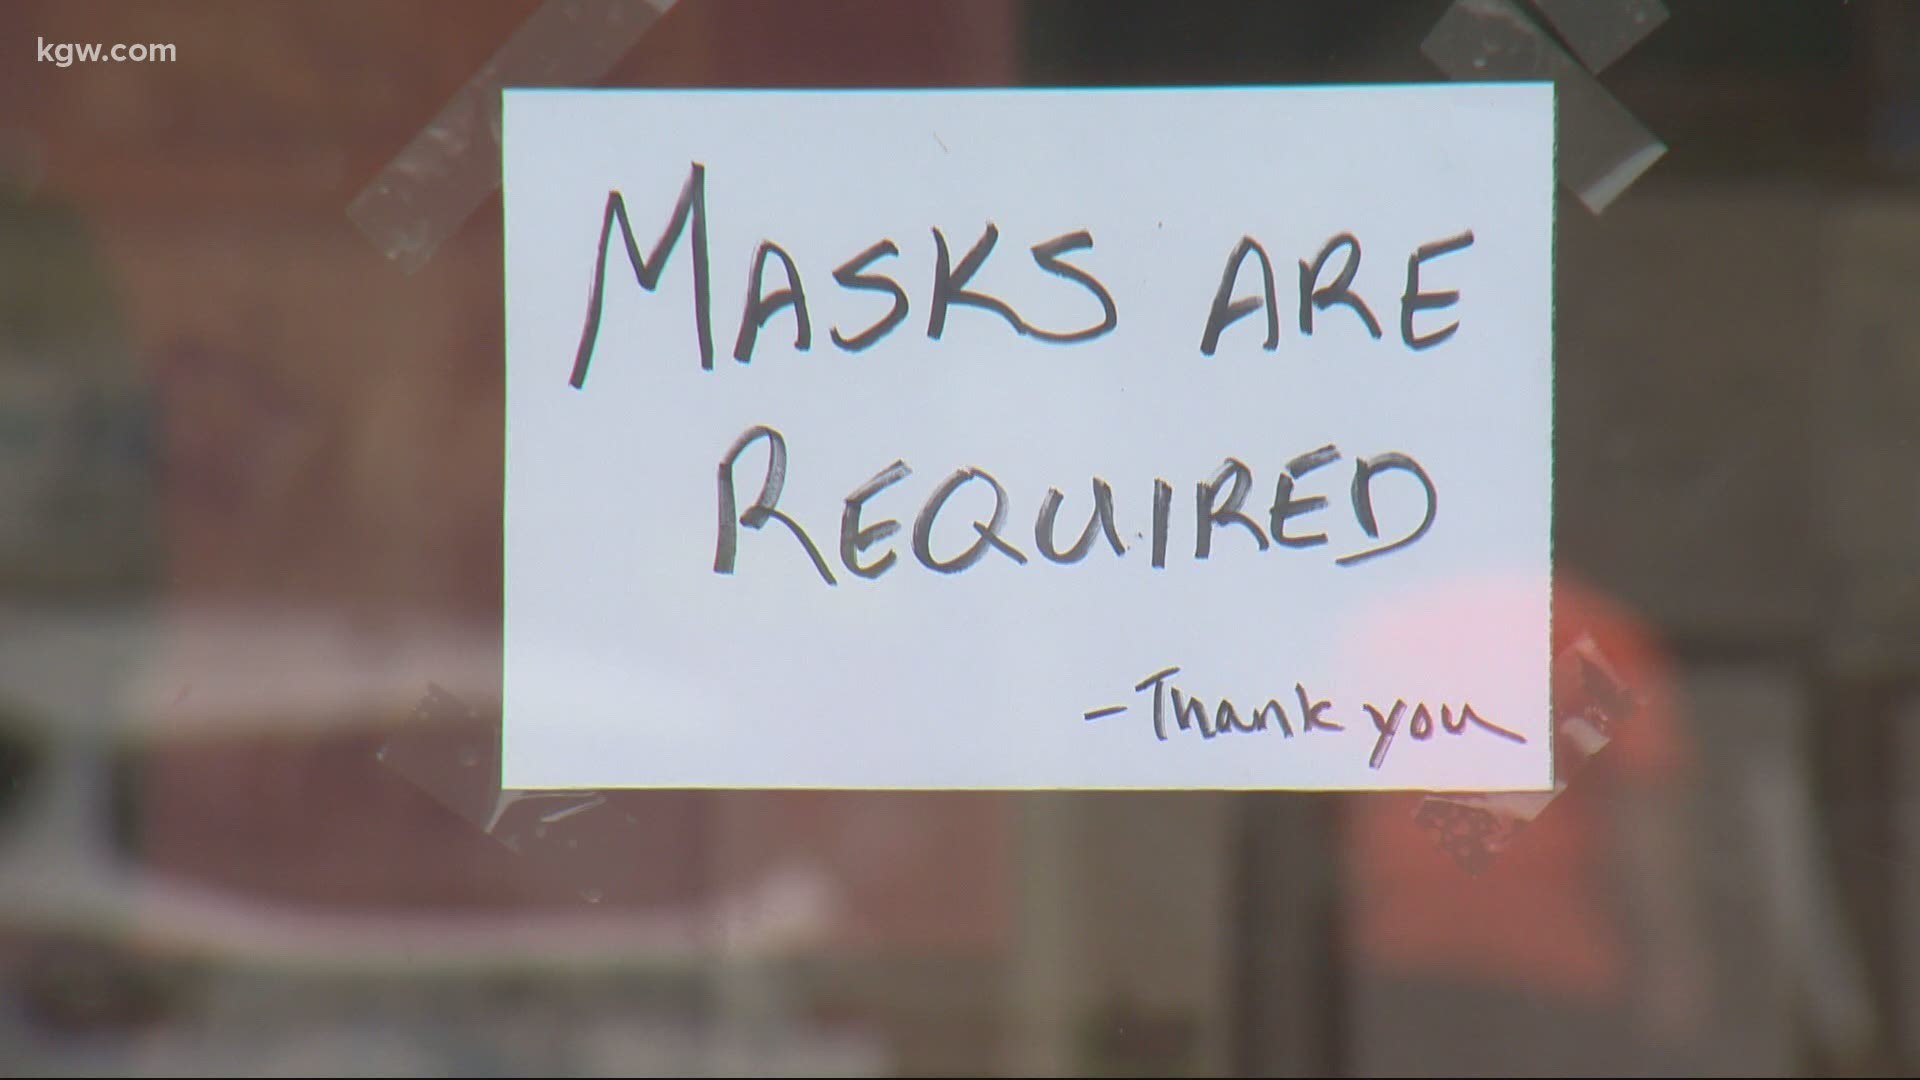 If businesses don't follow the new 'no mask, no service' rule in Washington, they could face penalties or even lose their licenses.